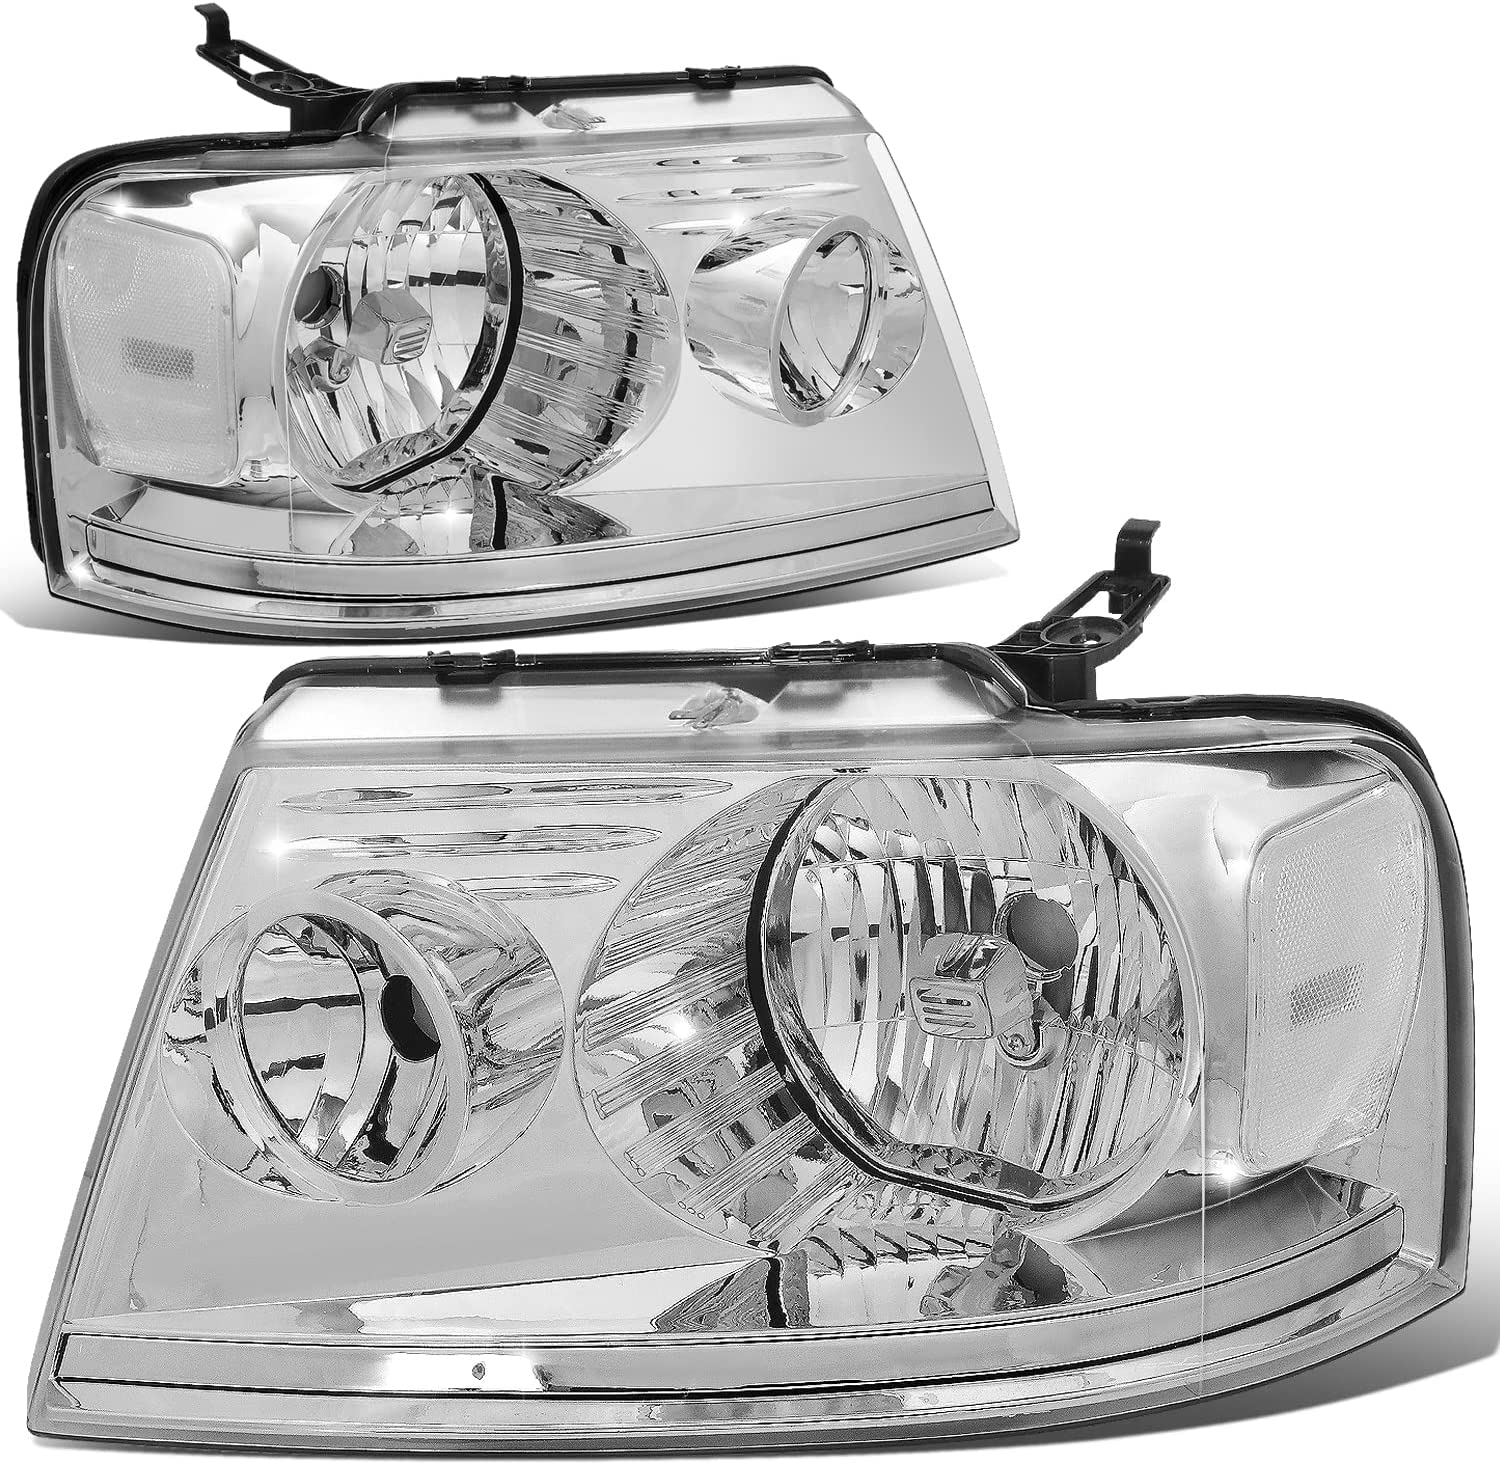 DNA MOTORING HL-OH-F1504-CH-AM Chrome Amber Headlights Replacement